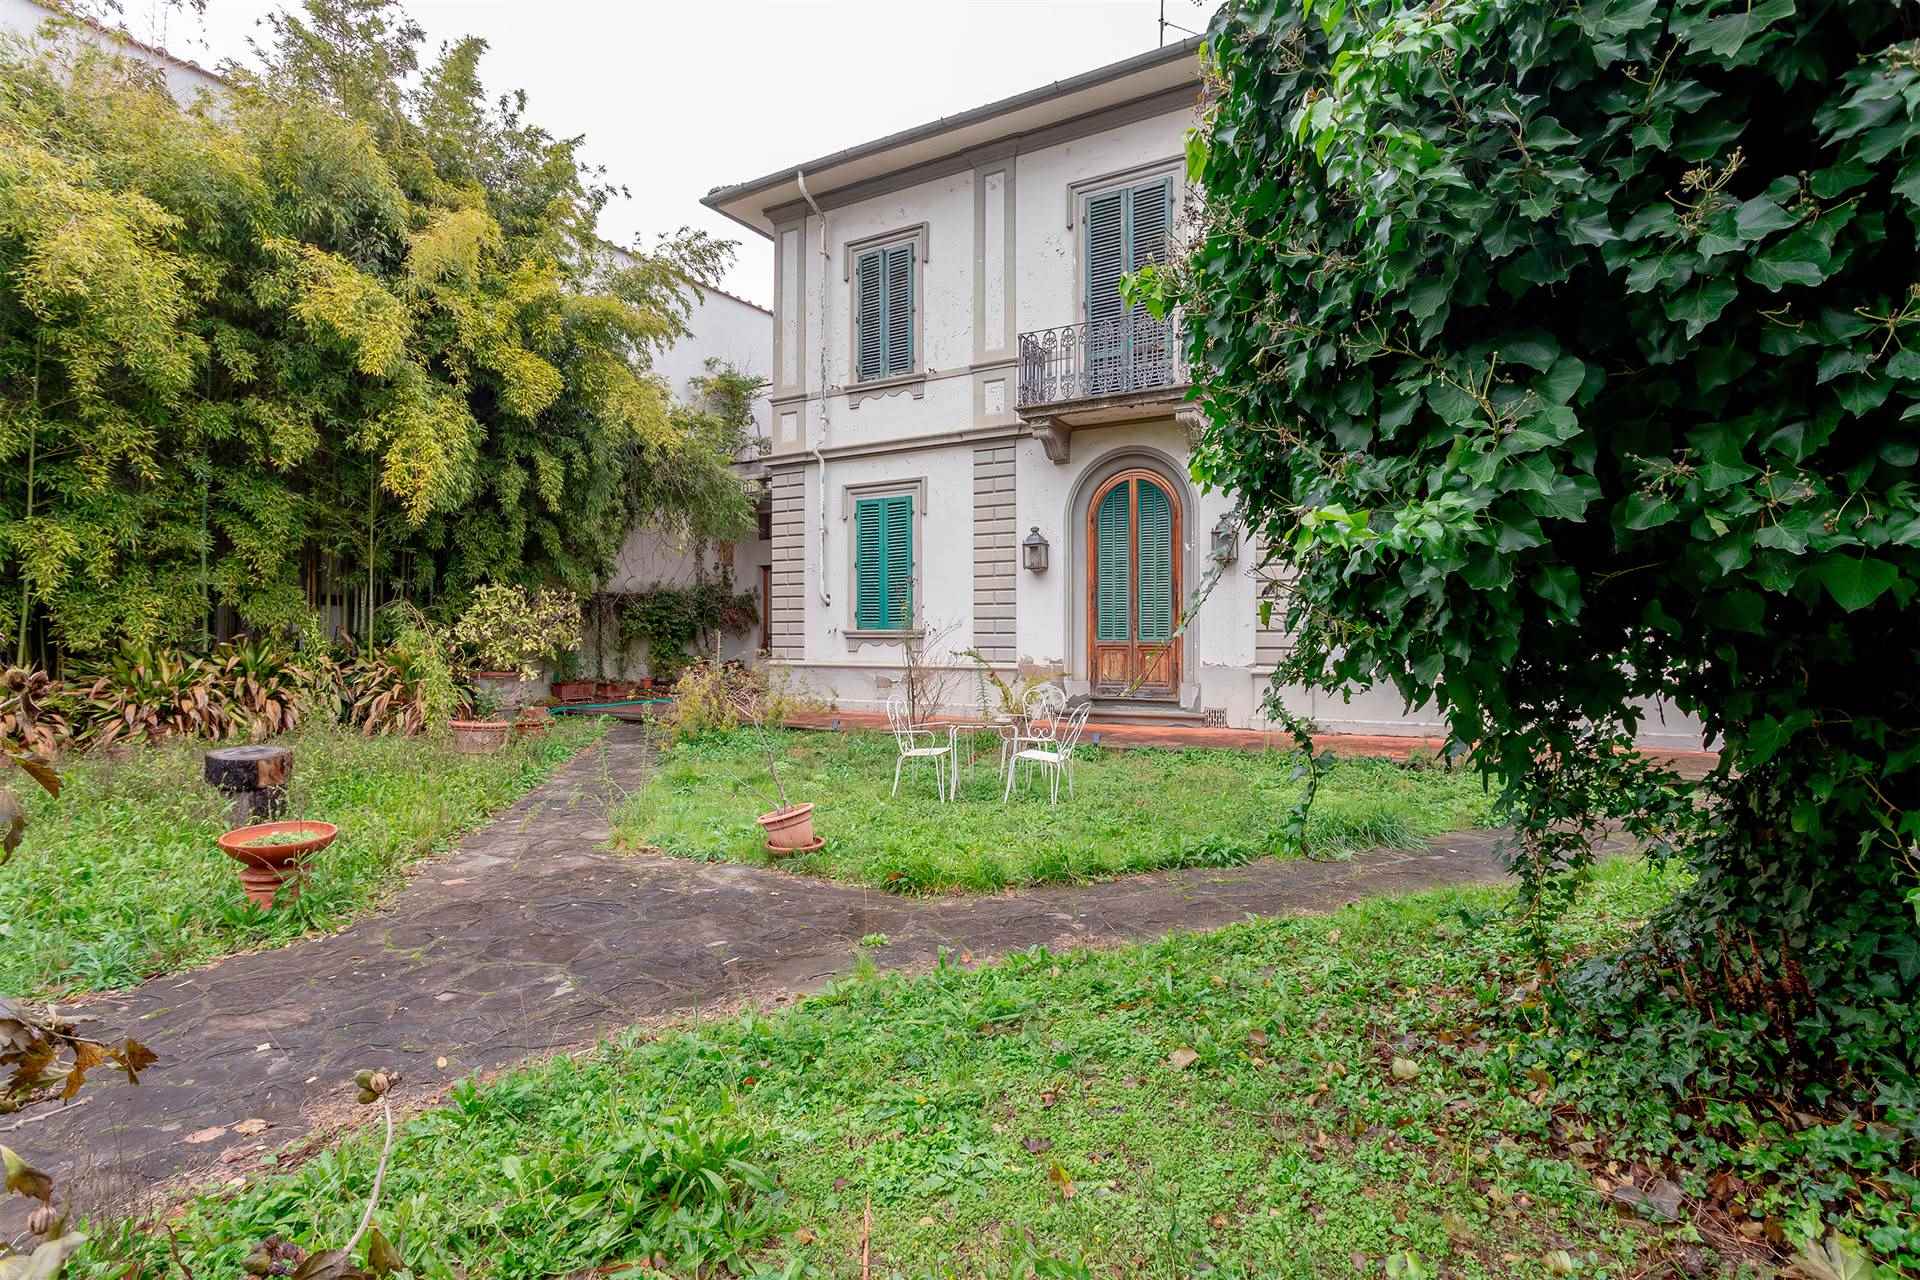 SAN PIERO A PONTI, CAMPI BISENZIO, Villa for sale of 436 Sq. mt., Be restored, Heating Individual heating system, Energetic class: G, placed at 